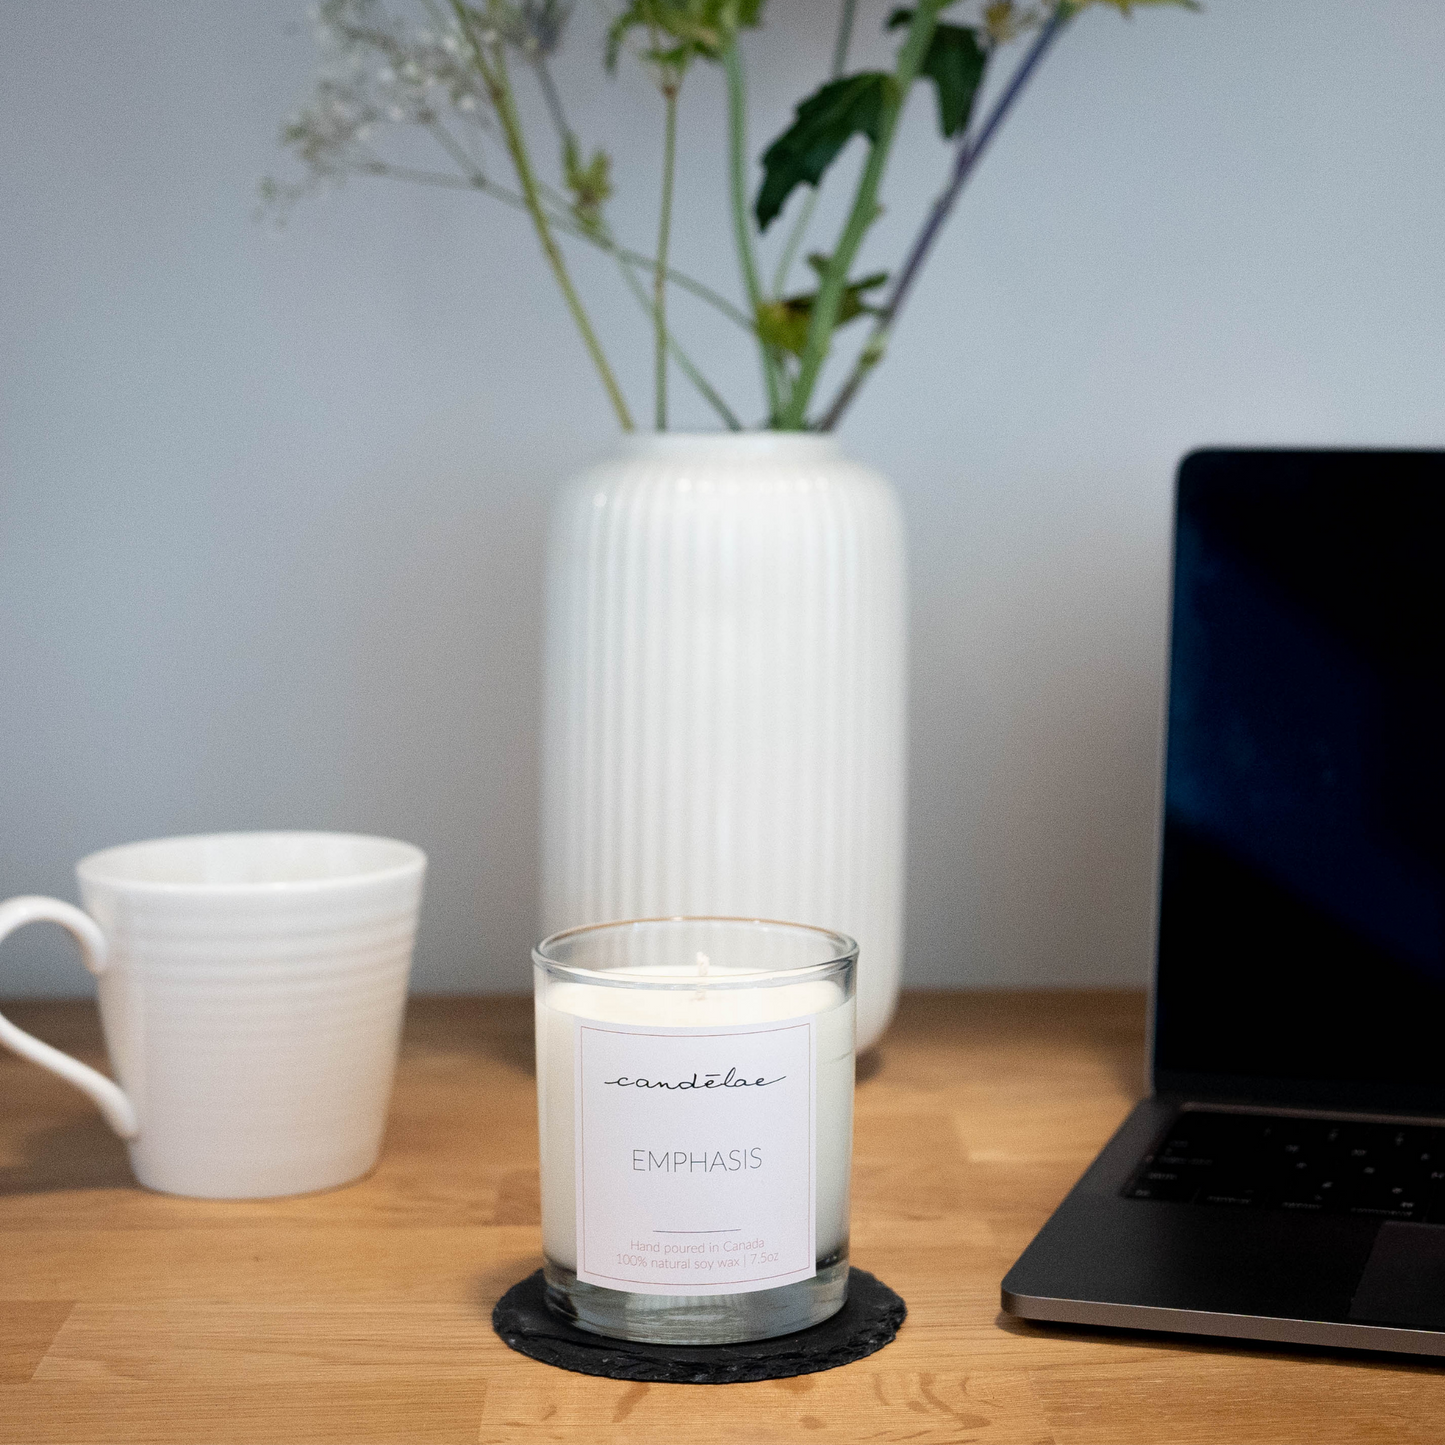 The premium soy wax candle from candēlae is display on a desk next to a laptop and a cup of tea